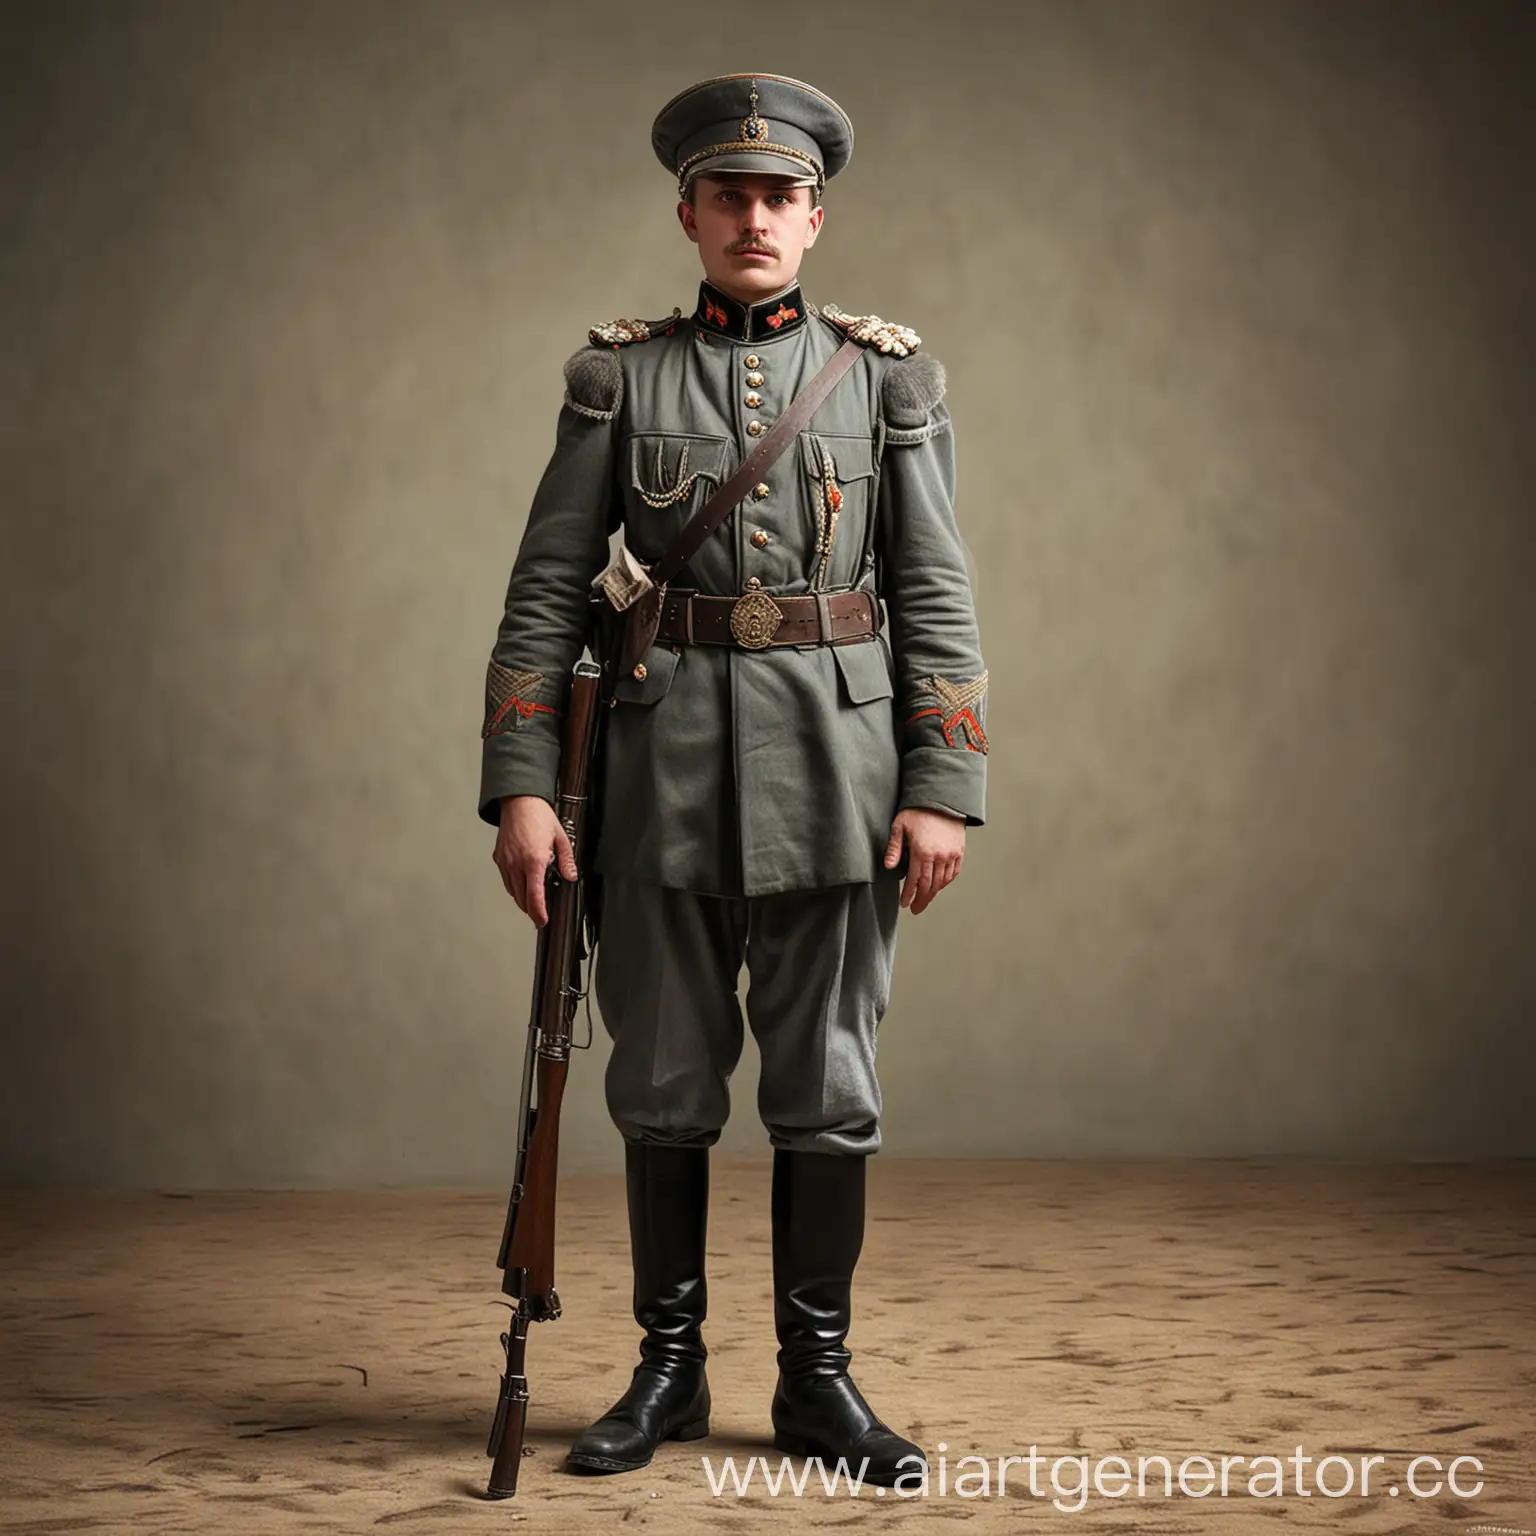 Russian-Imperial-Soldier-1900-with-Rifle-in-Full-Stature